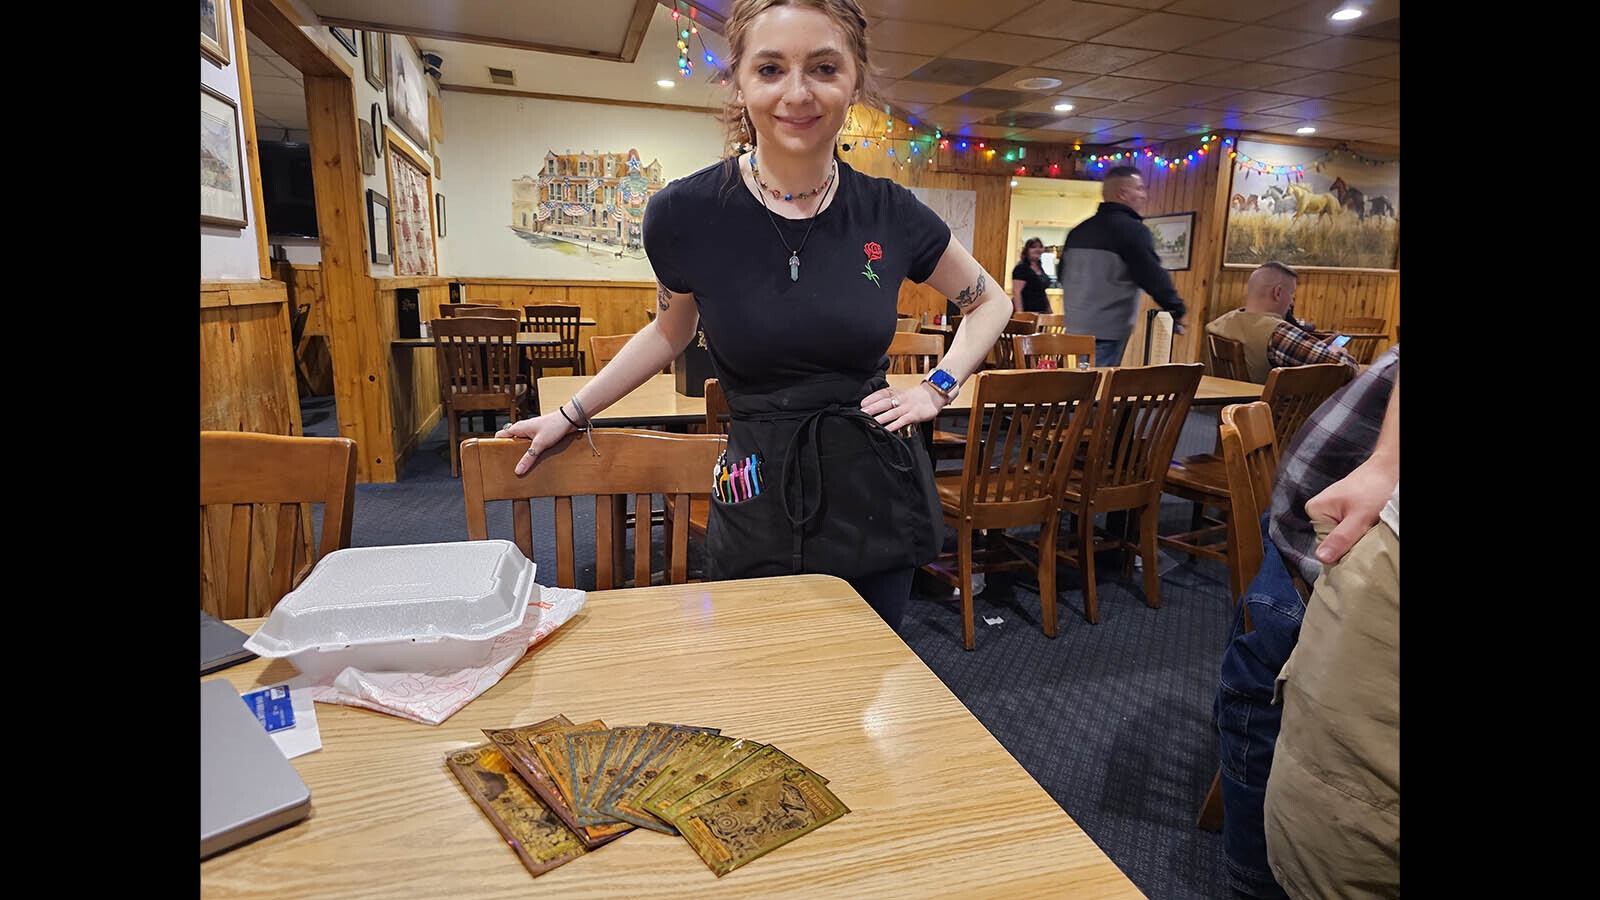 Jaquie Georgio, a waitress at T-Joe's Steakhouse and Saloon, looks at a collection of goldbacks from various states. She has yet to receive a tip in them, but said they are cool looking and she would love to get one.